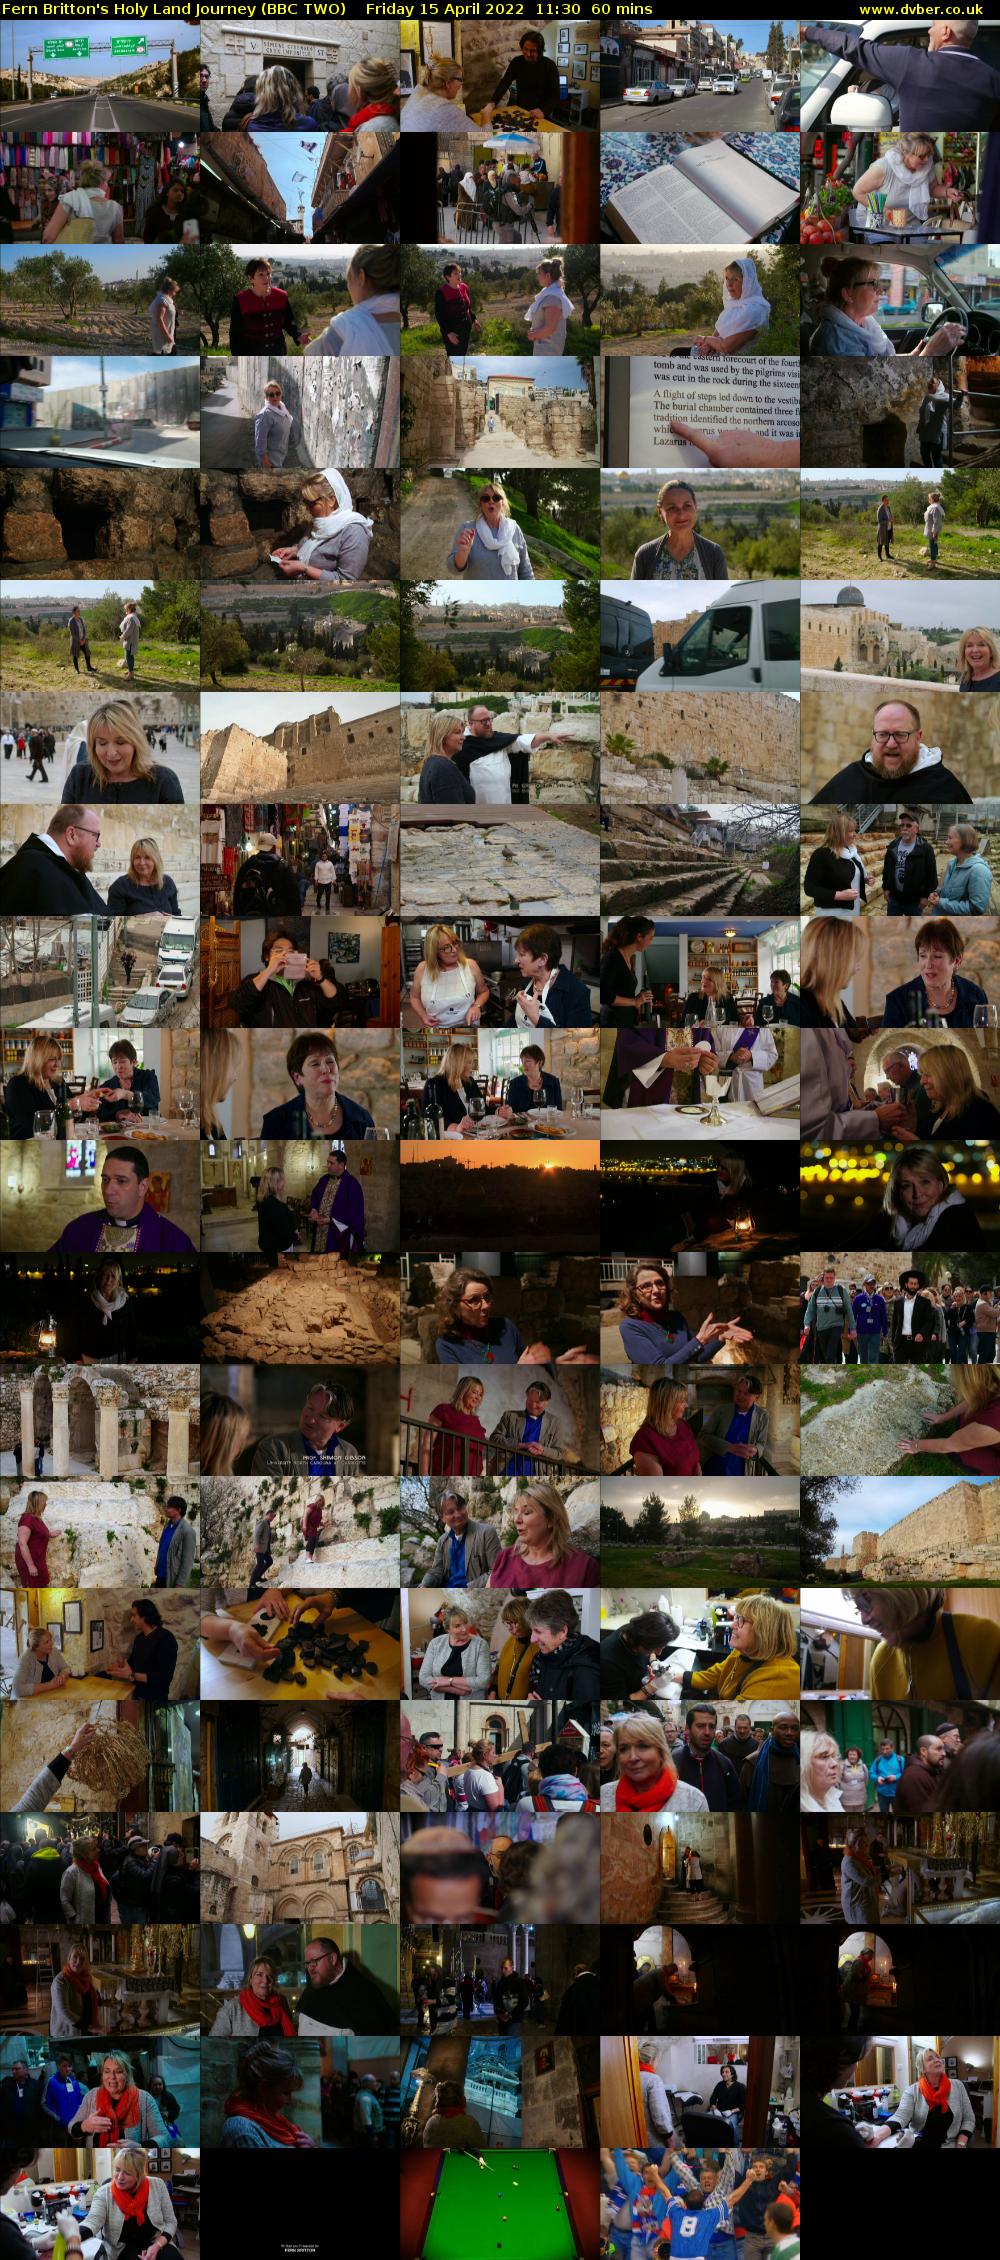 Fern Britton's Holy Land Journey (BBC TWO) Friday 15 April 2022 11:30 - 12:30